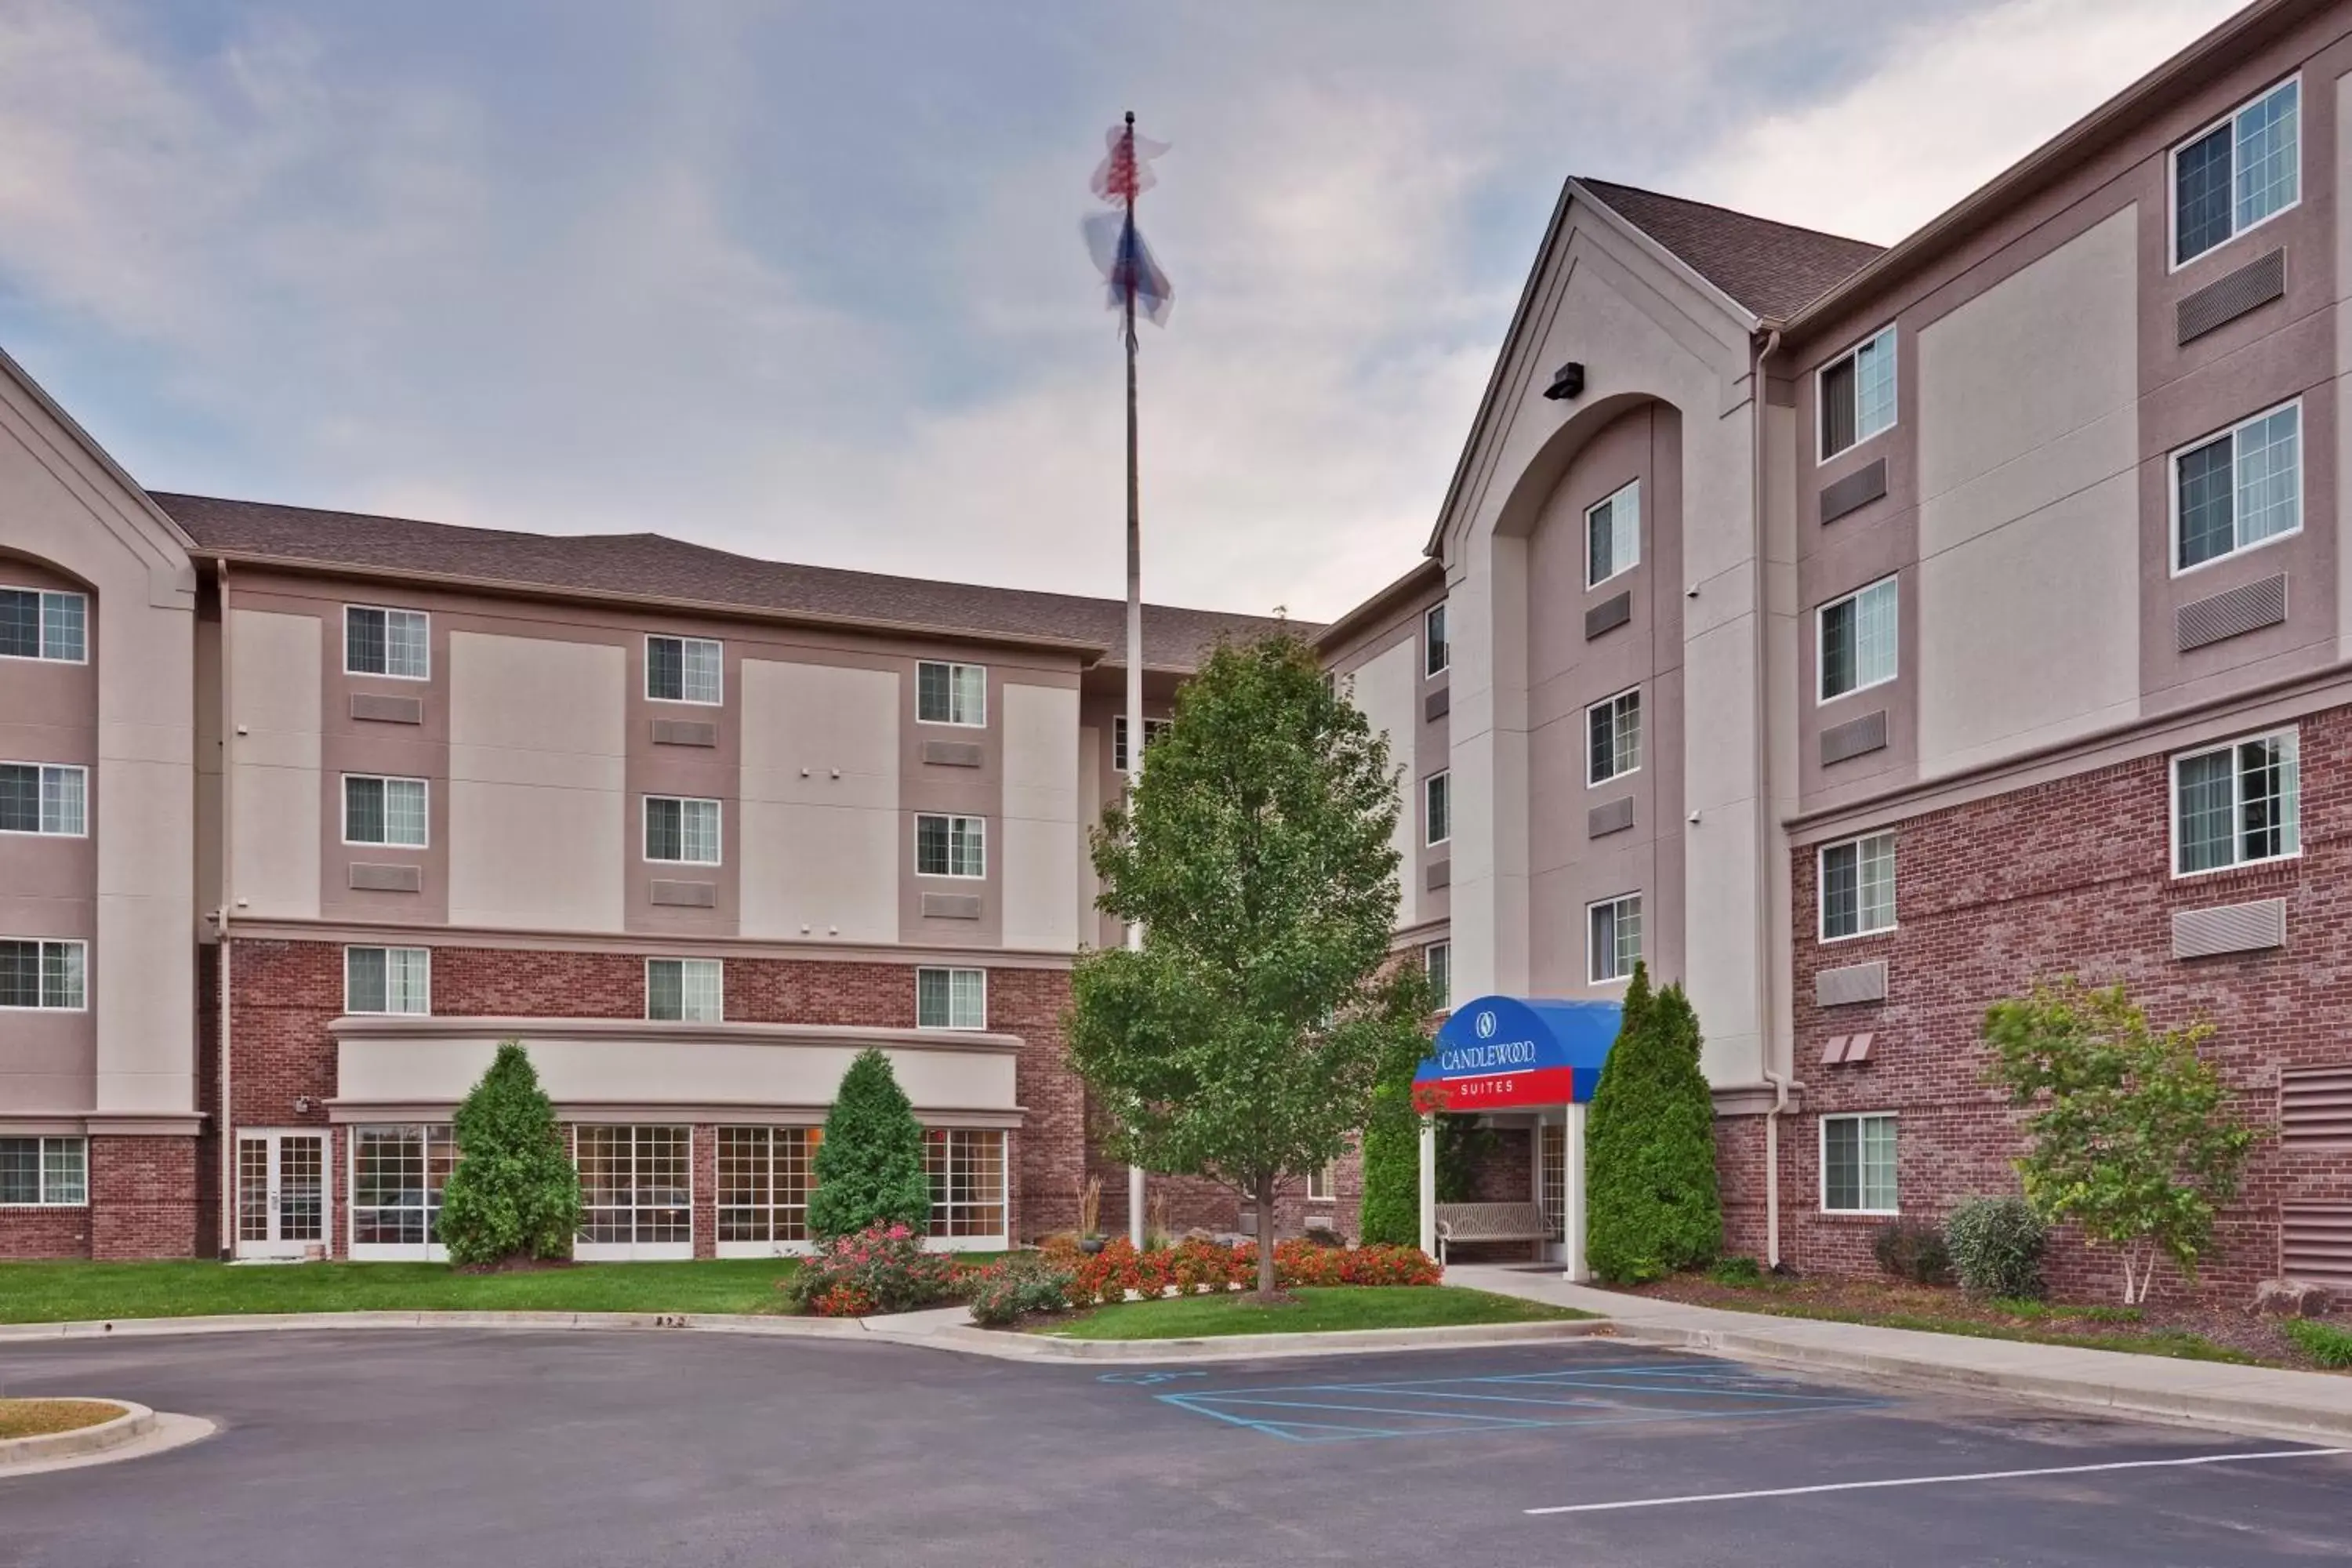 Property Building in Candlewood Suites Indianapolis Northeast, an IHG Hotel